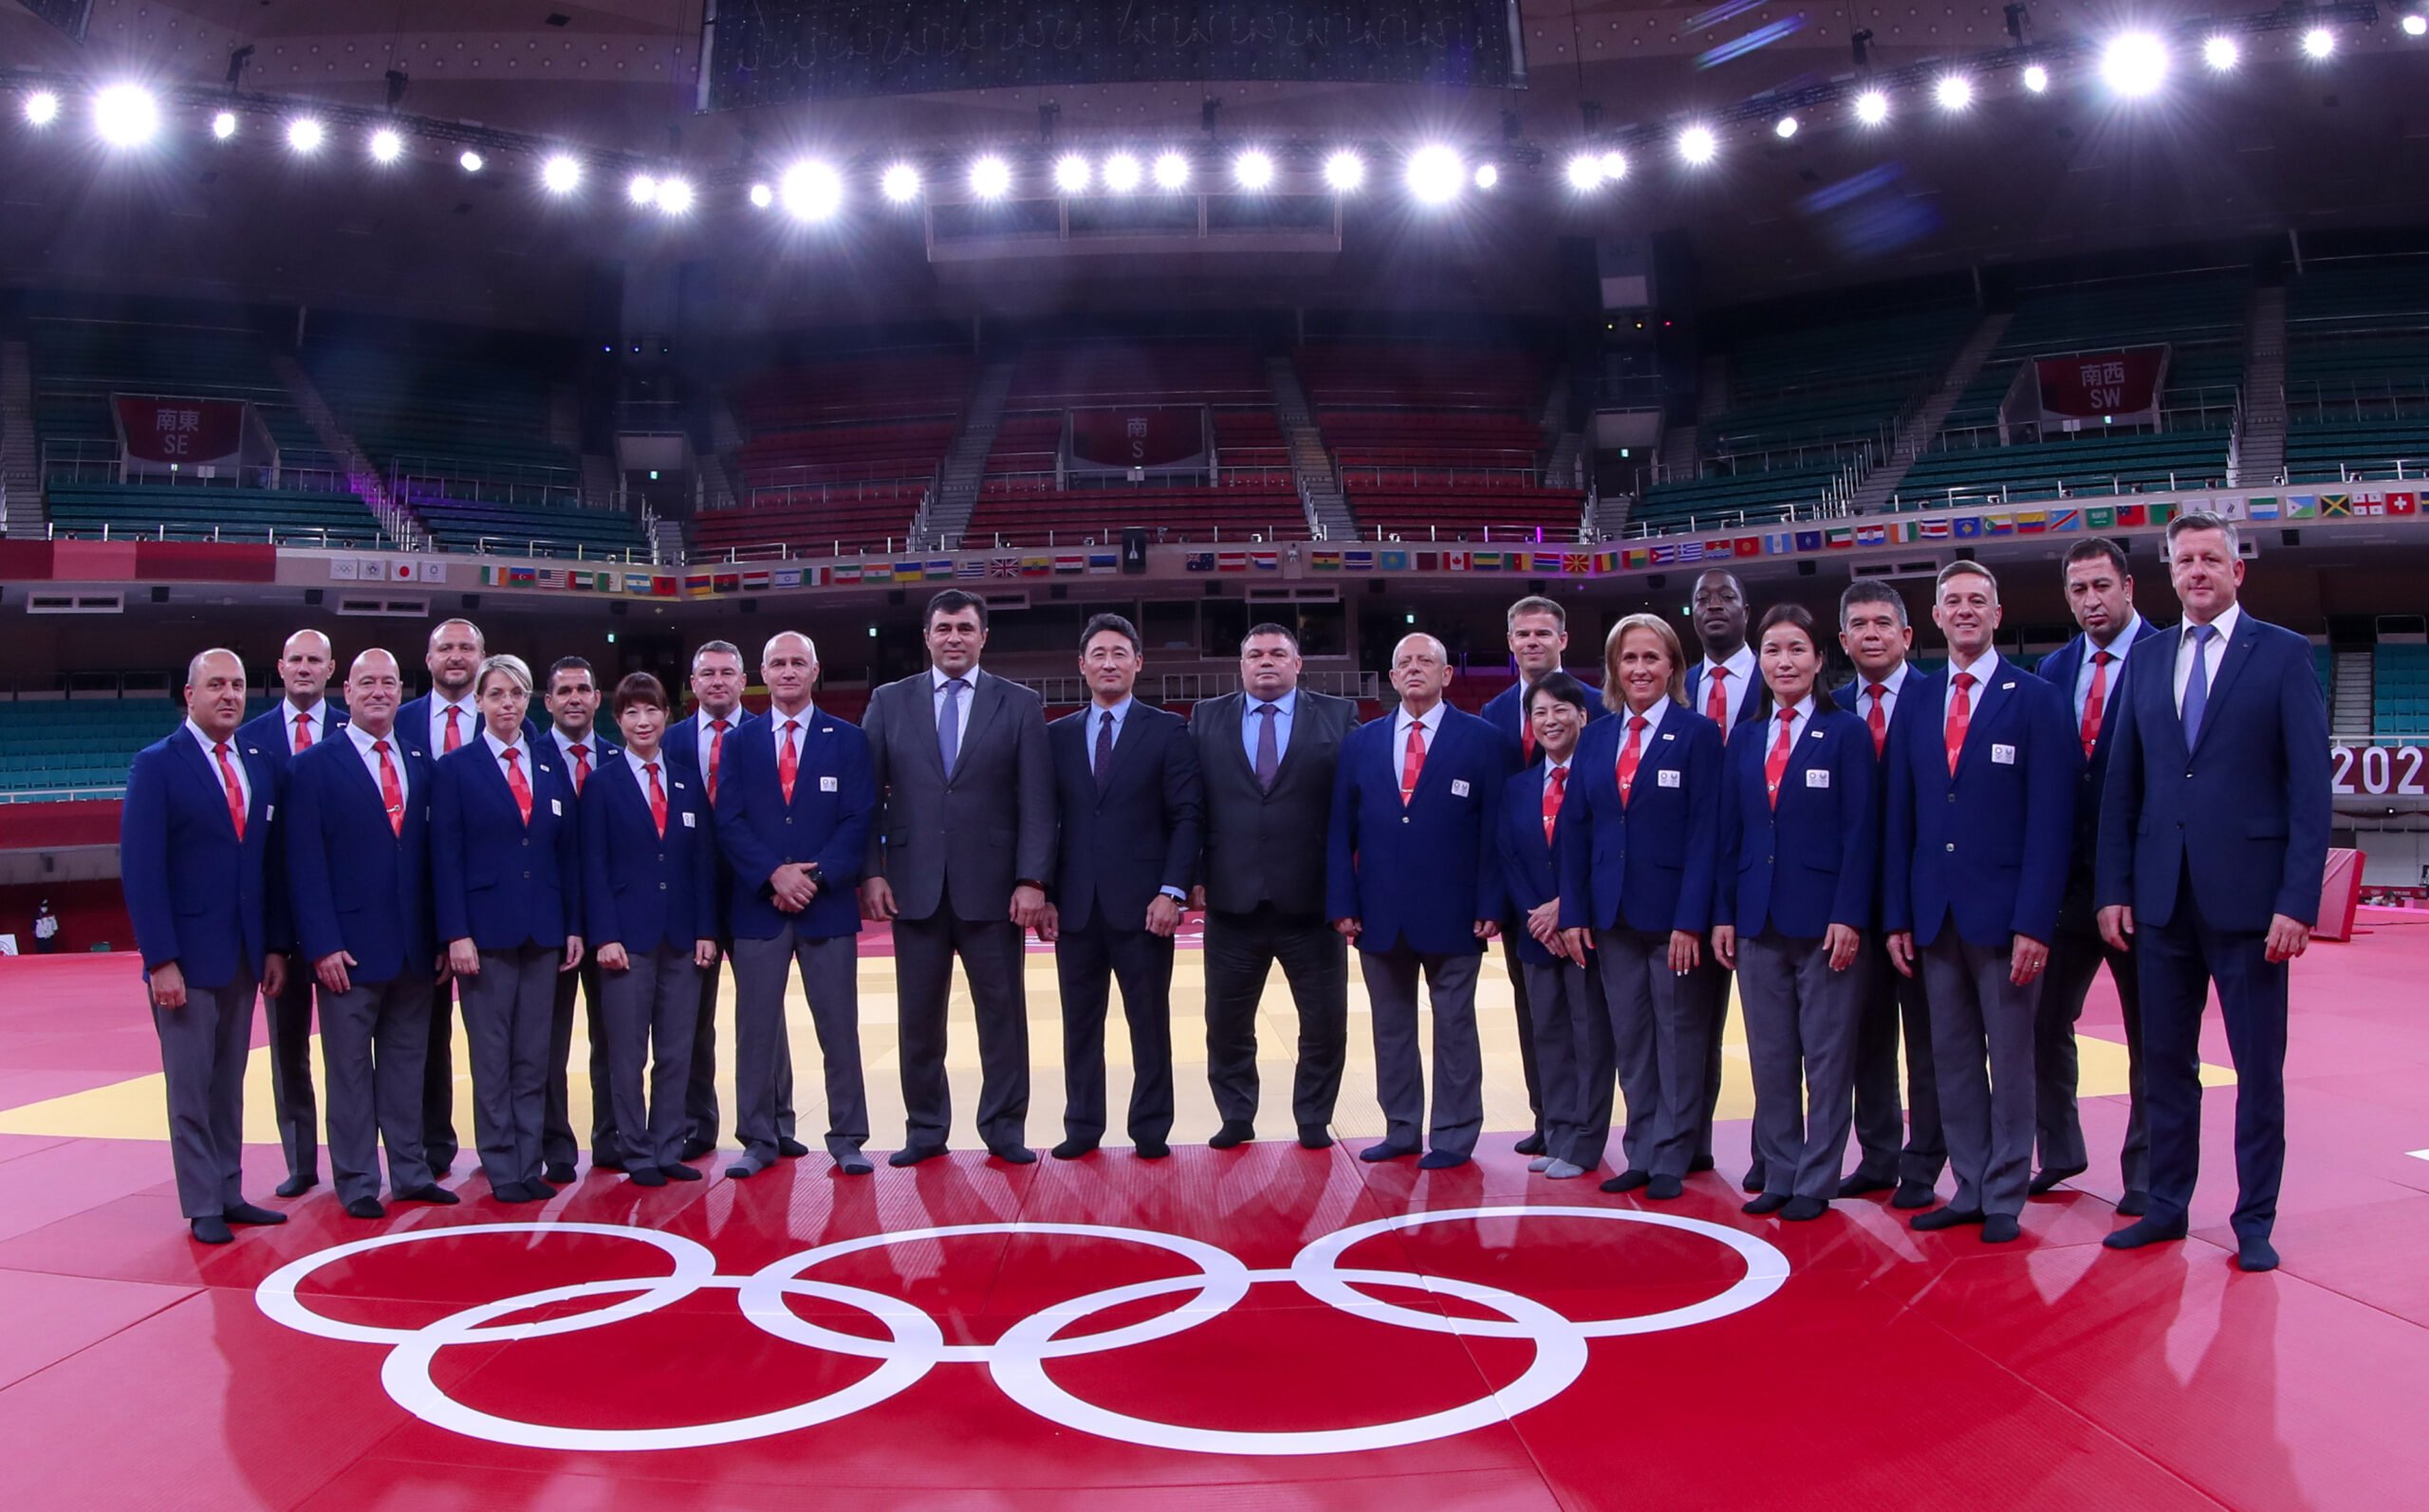 EJU REFEREES REFLECT ON THEIR MOST REMARKABLE MOMENTS IN TOKYO